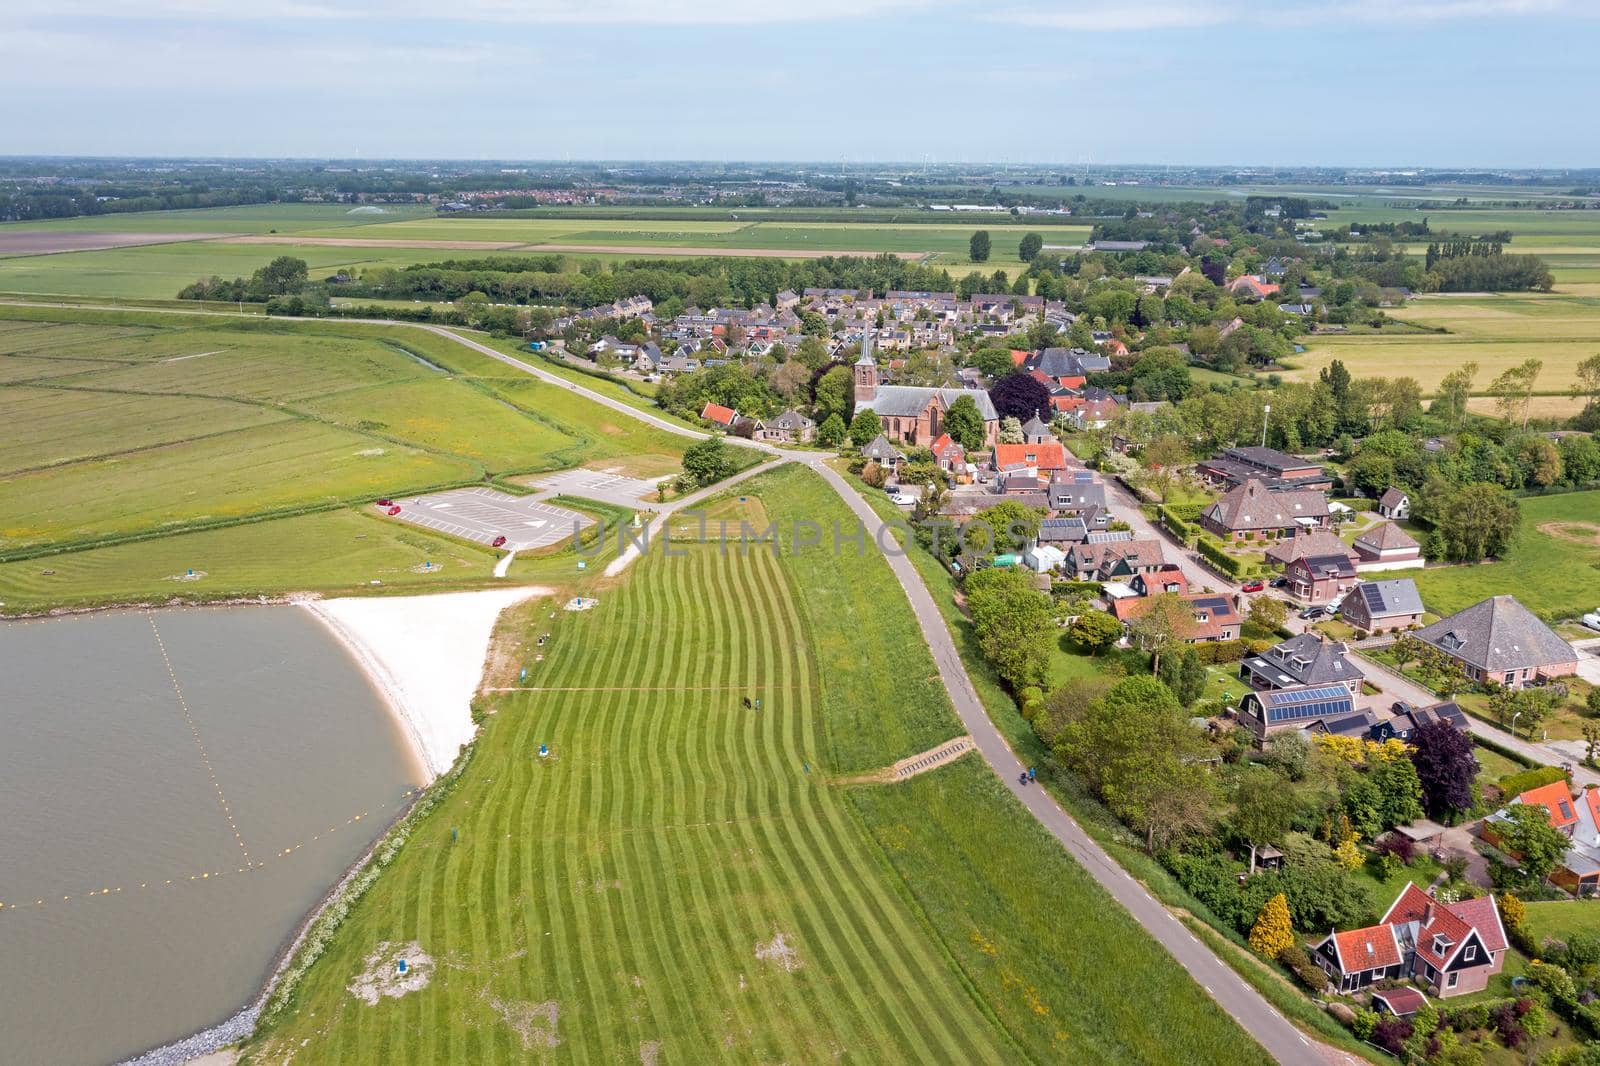 Aerial from the village Schellinkhout at the IJsselmeer in the Netherlands by devy